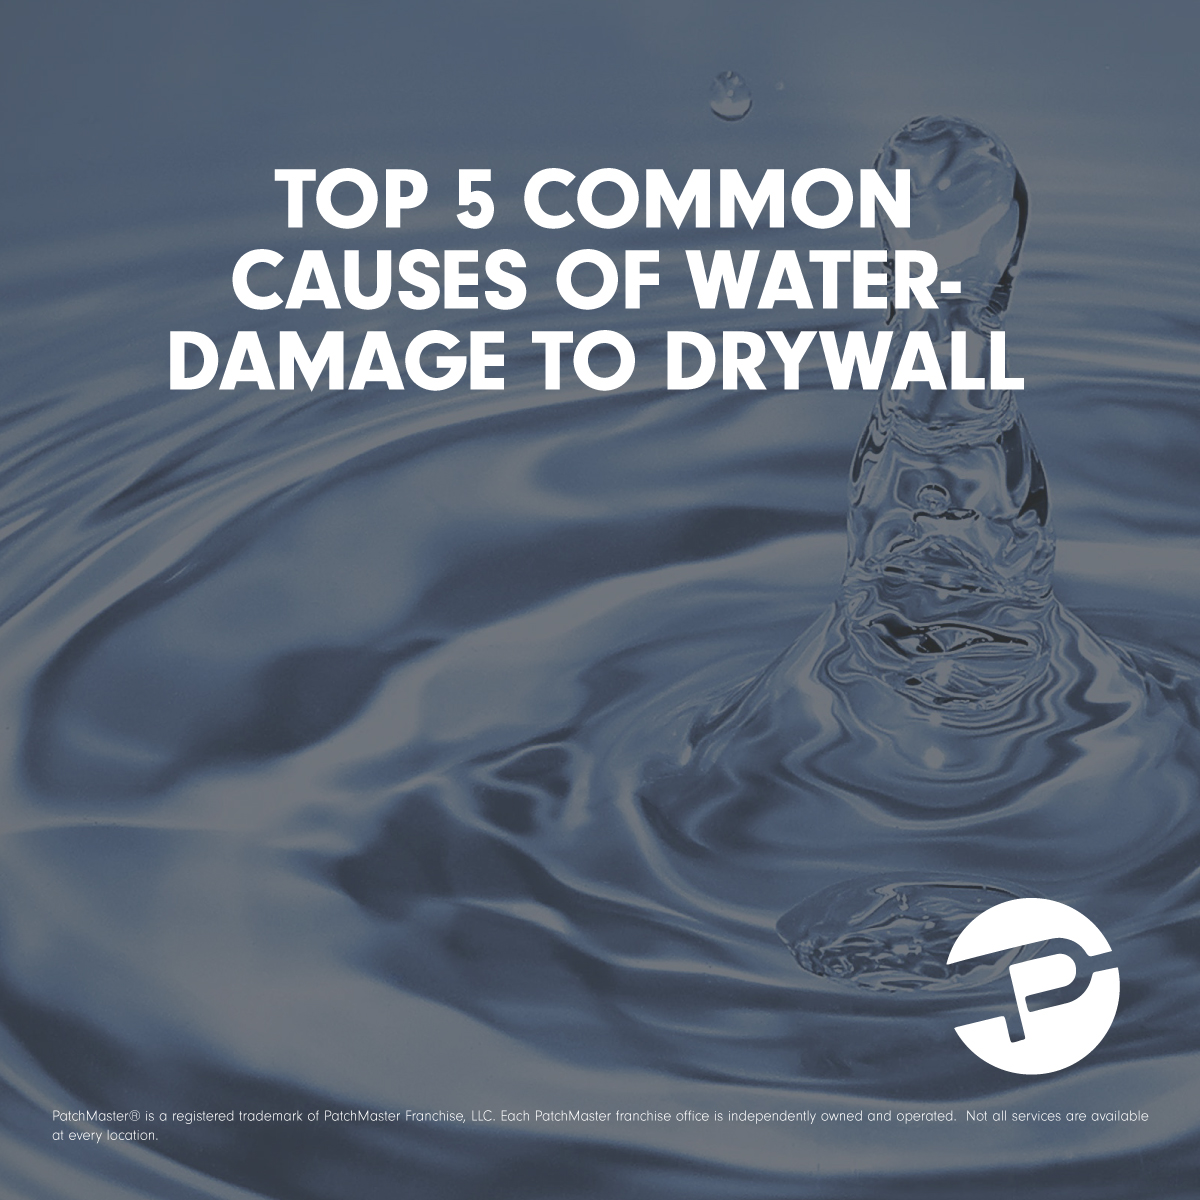 Top 5 common causes of water damage to drywall and provide insights on how to address them.